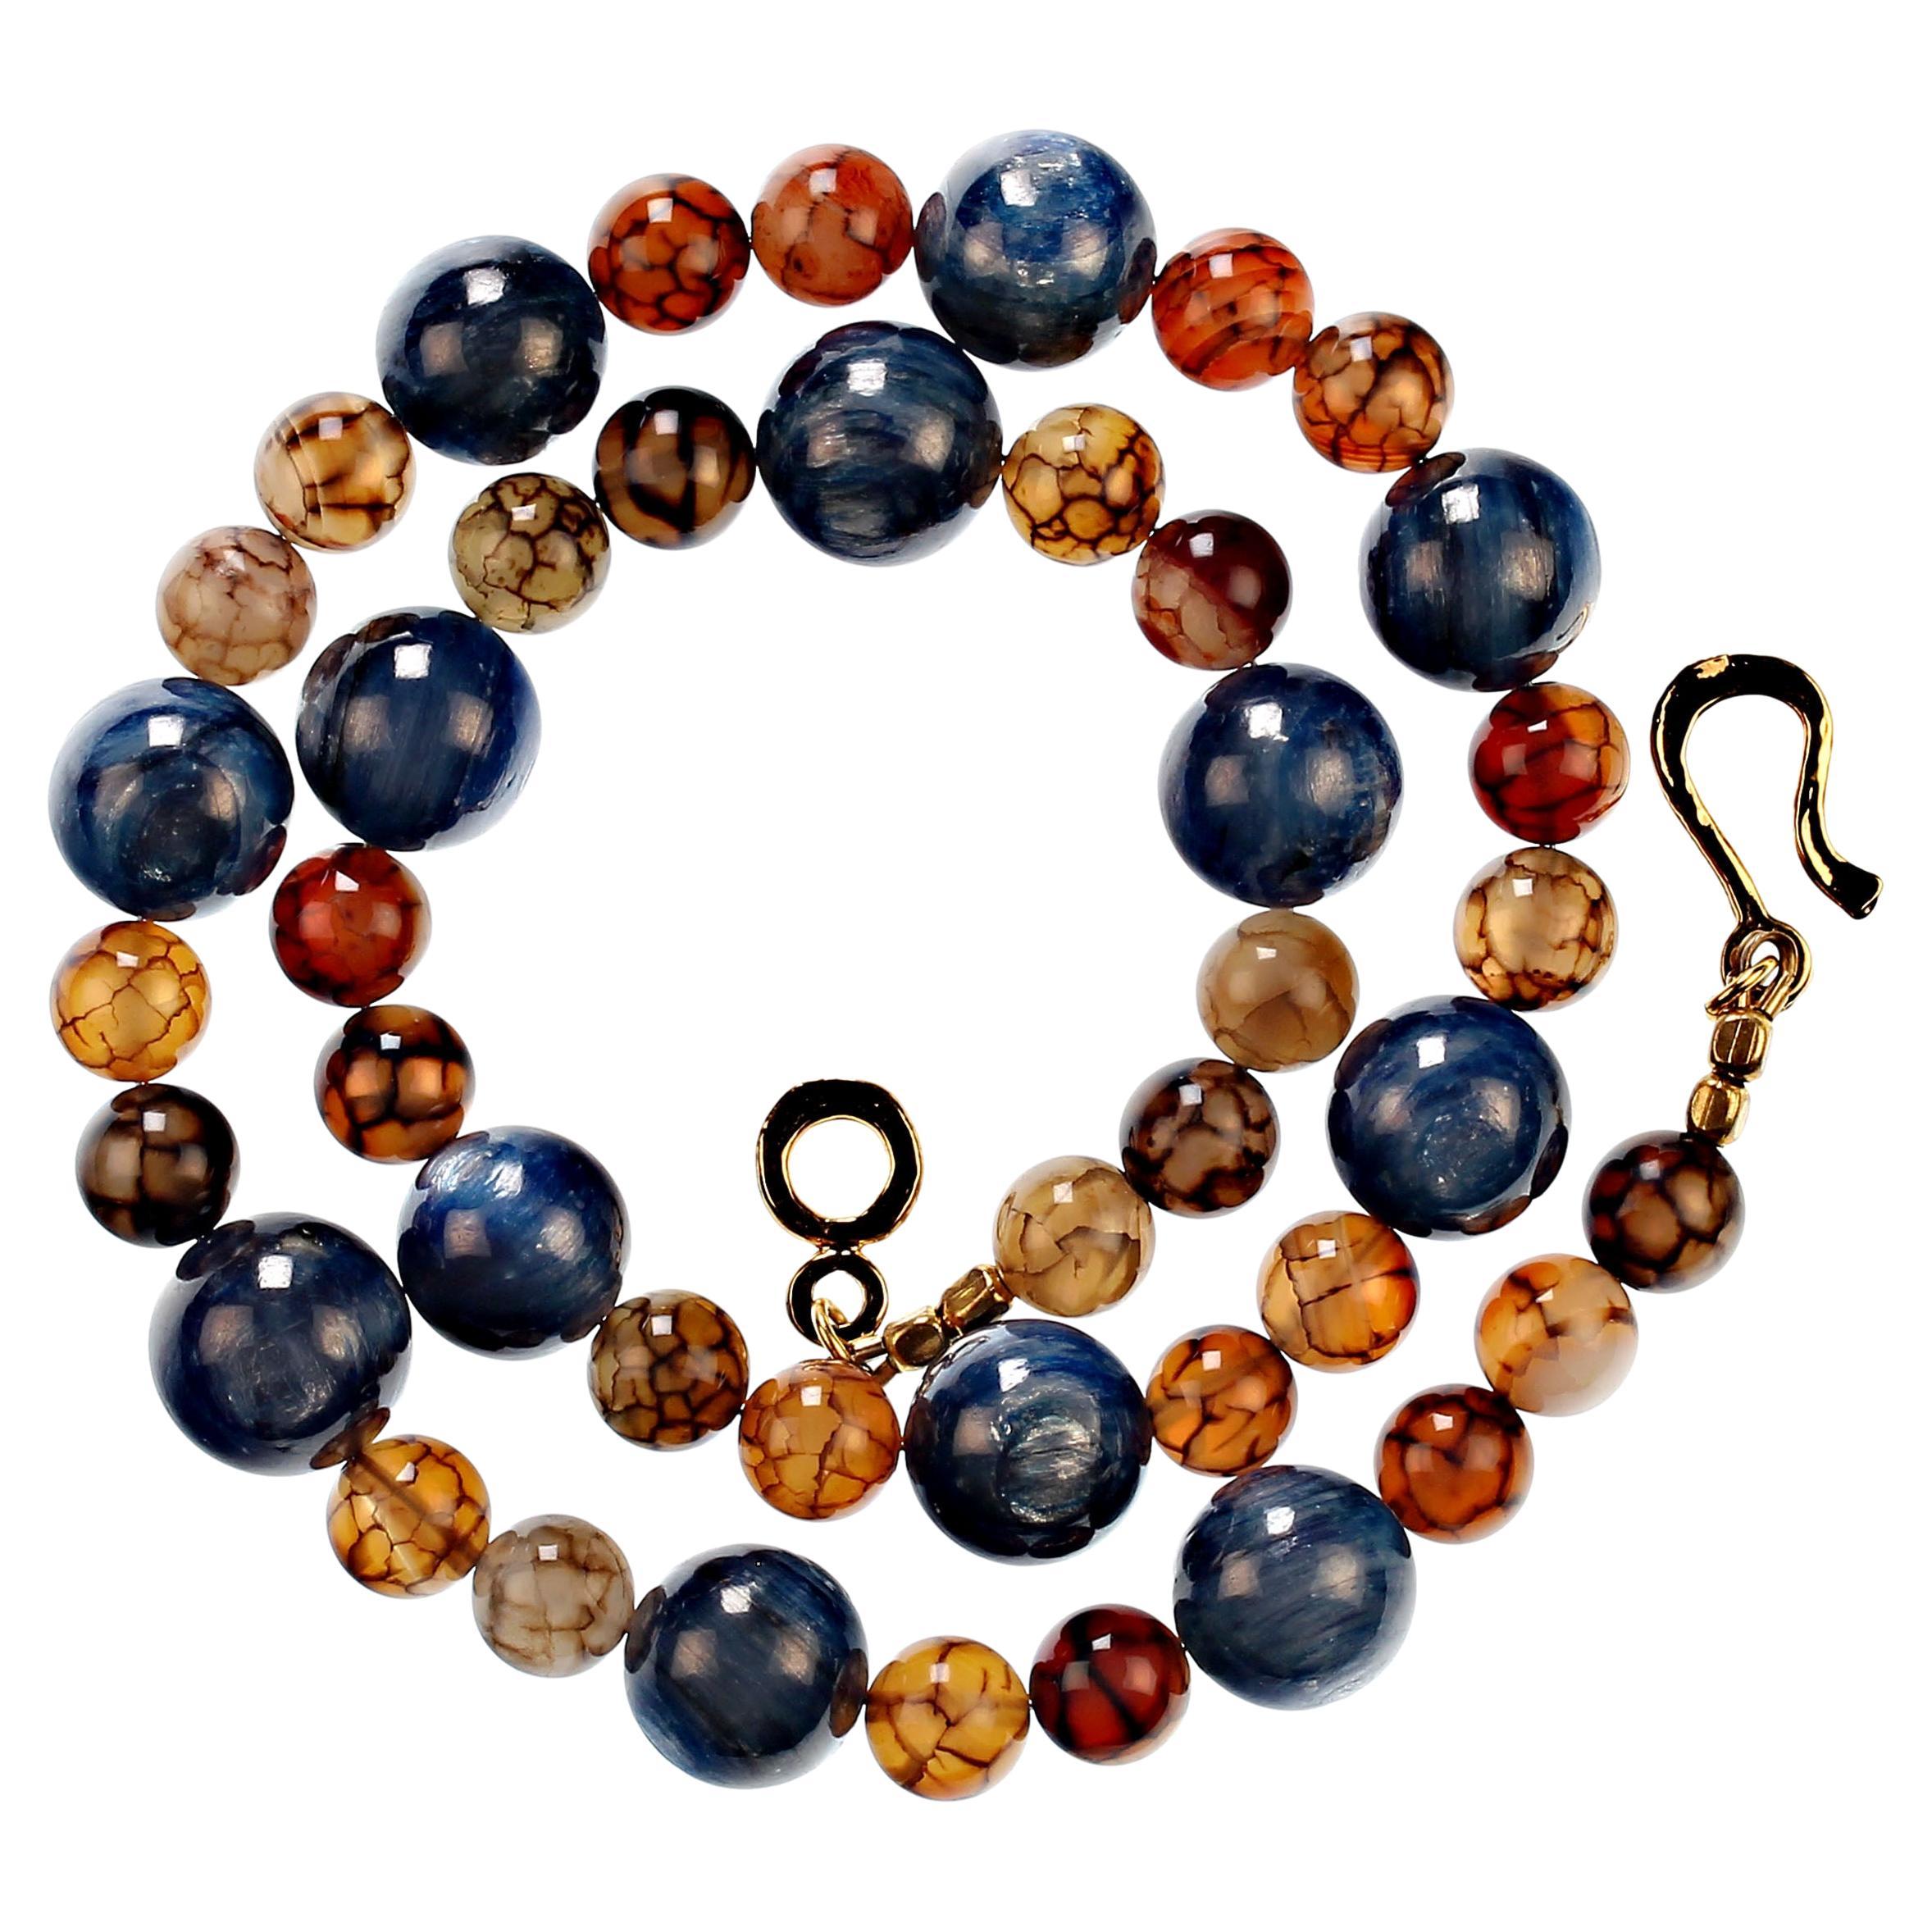 Fantastic necklace of chatoyant blue Kyanite and multi color Spiderweb Jasper.  This 22 inch  necklace is a delight to wear.  Blue and brown is a perfect combination especially in these highly polished gemstones. Wear this glowing necklace and